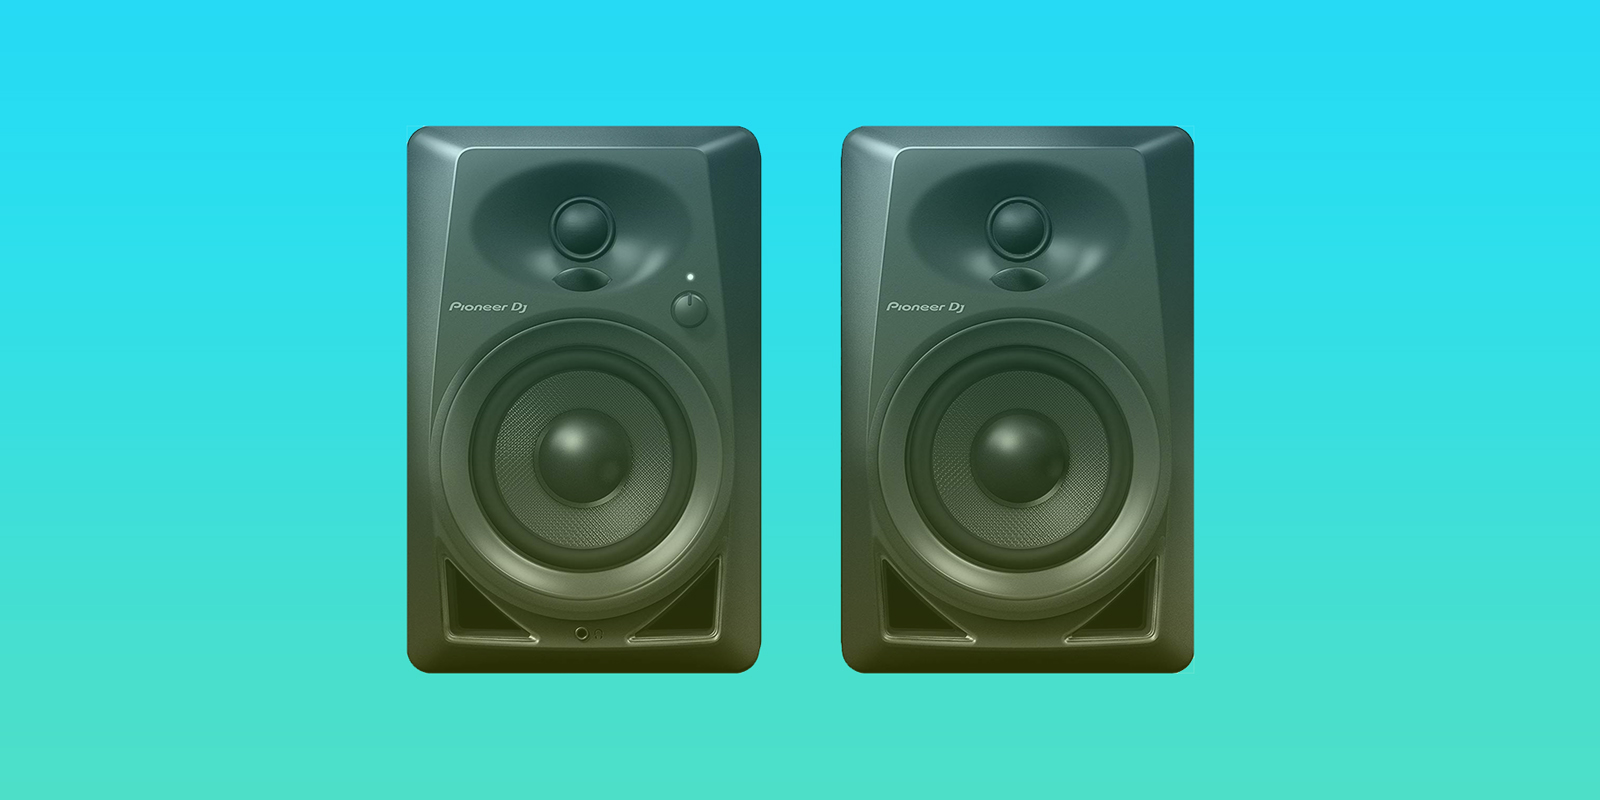 The Best Budget Speakers